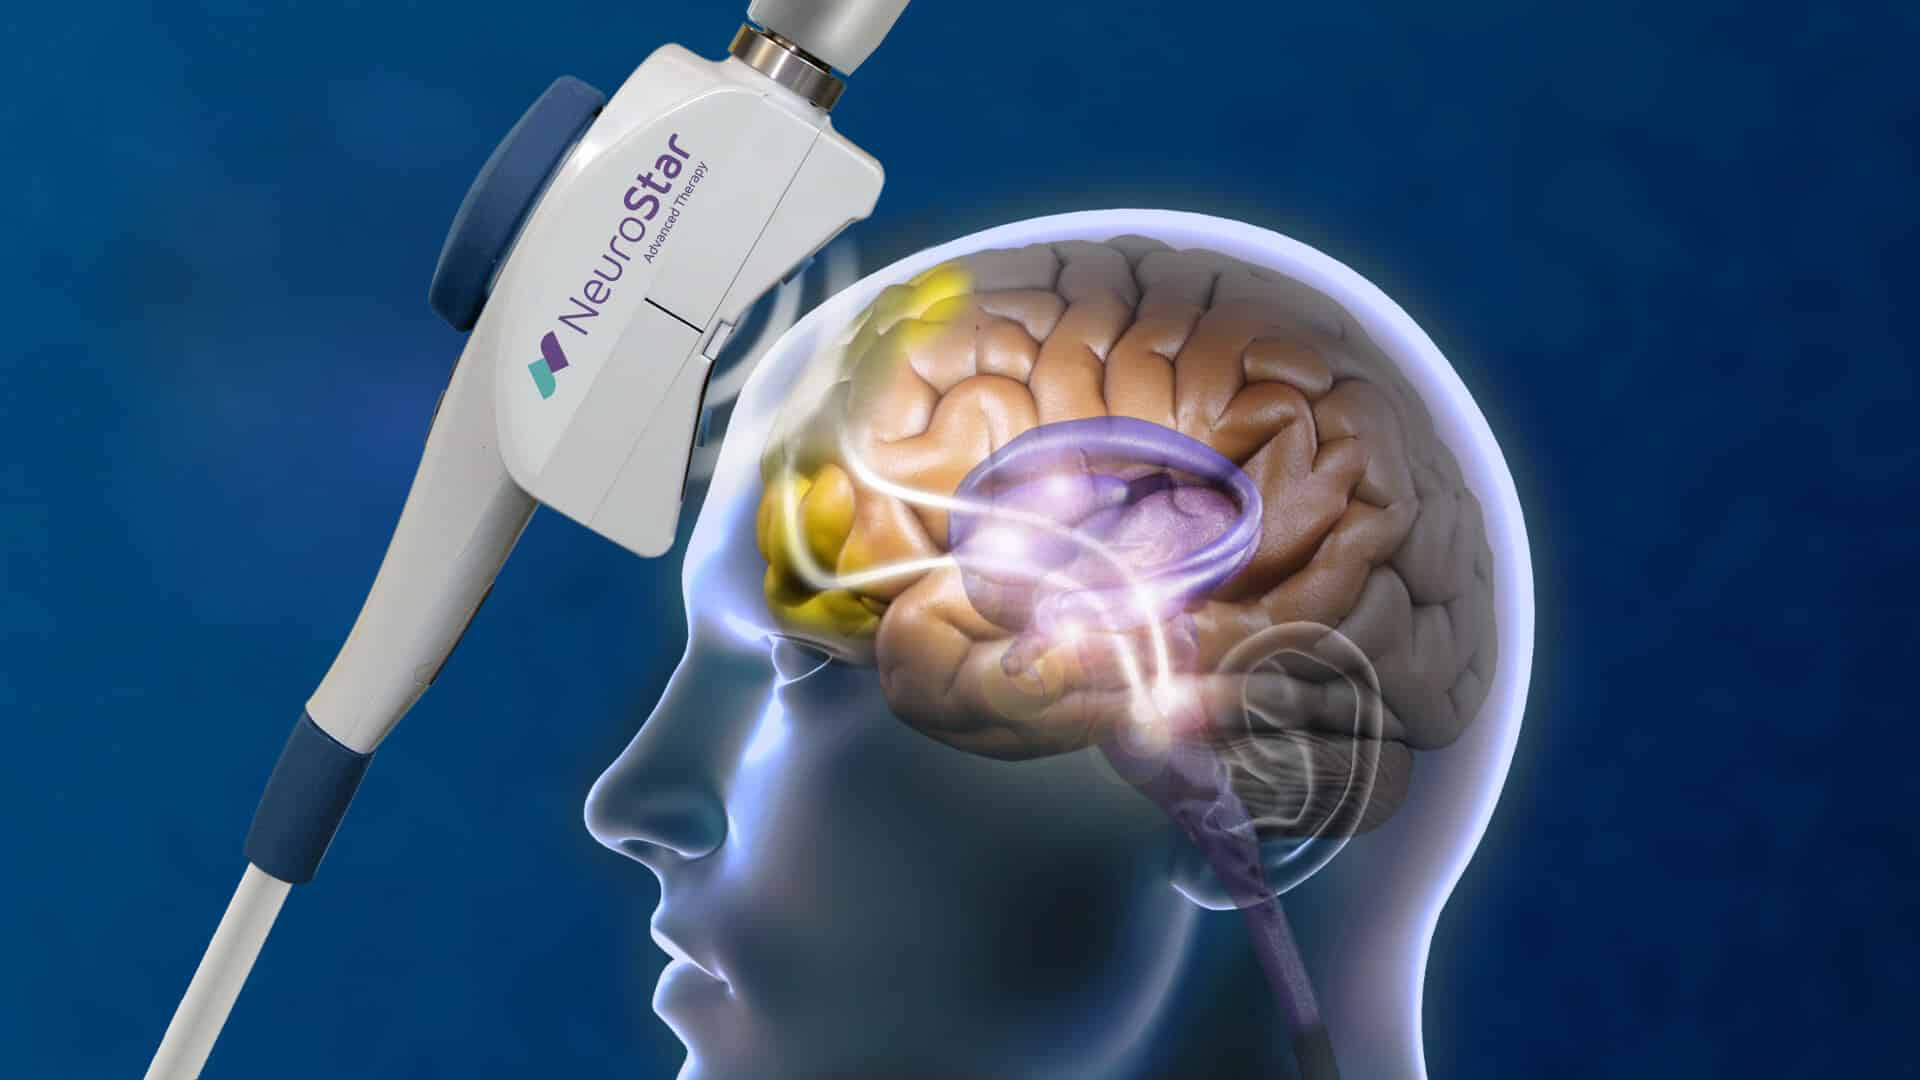 TMS Therapy Approved for Ages 15 and Up